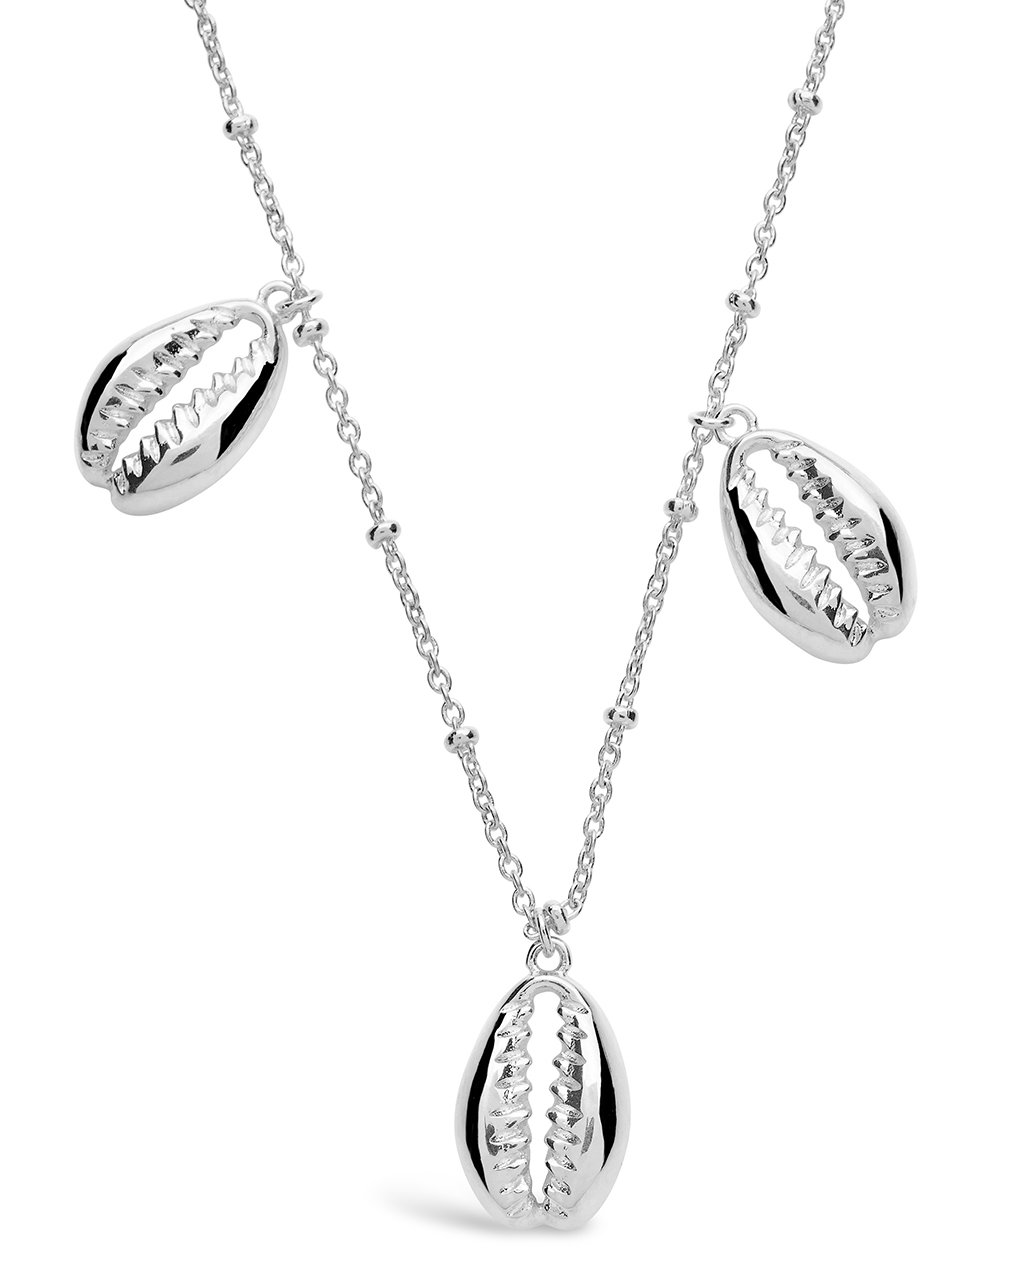 Puka Shell Charm Necklace - Sterling Forever